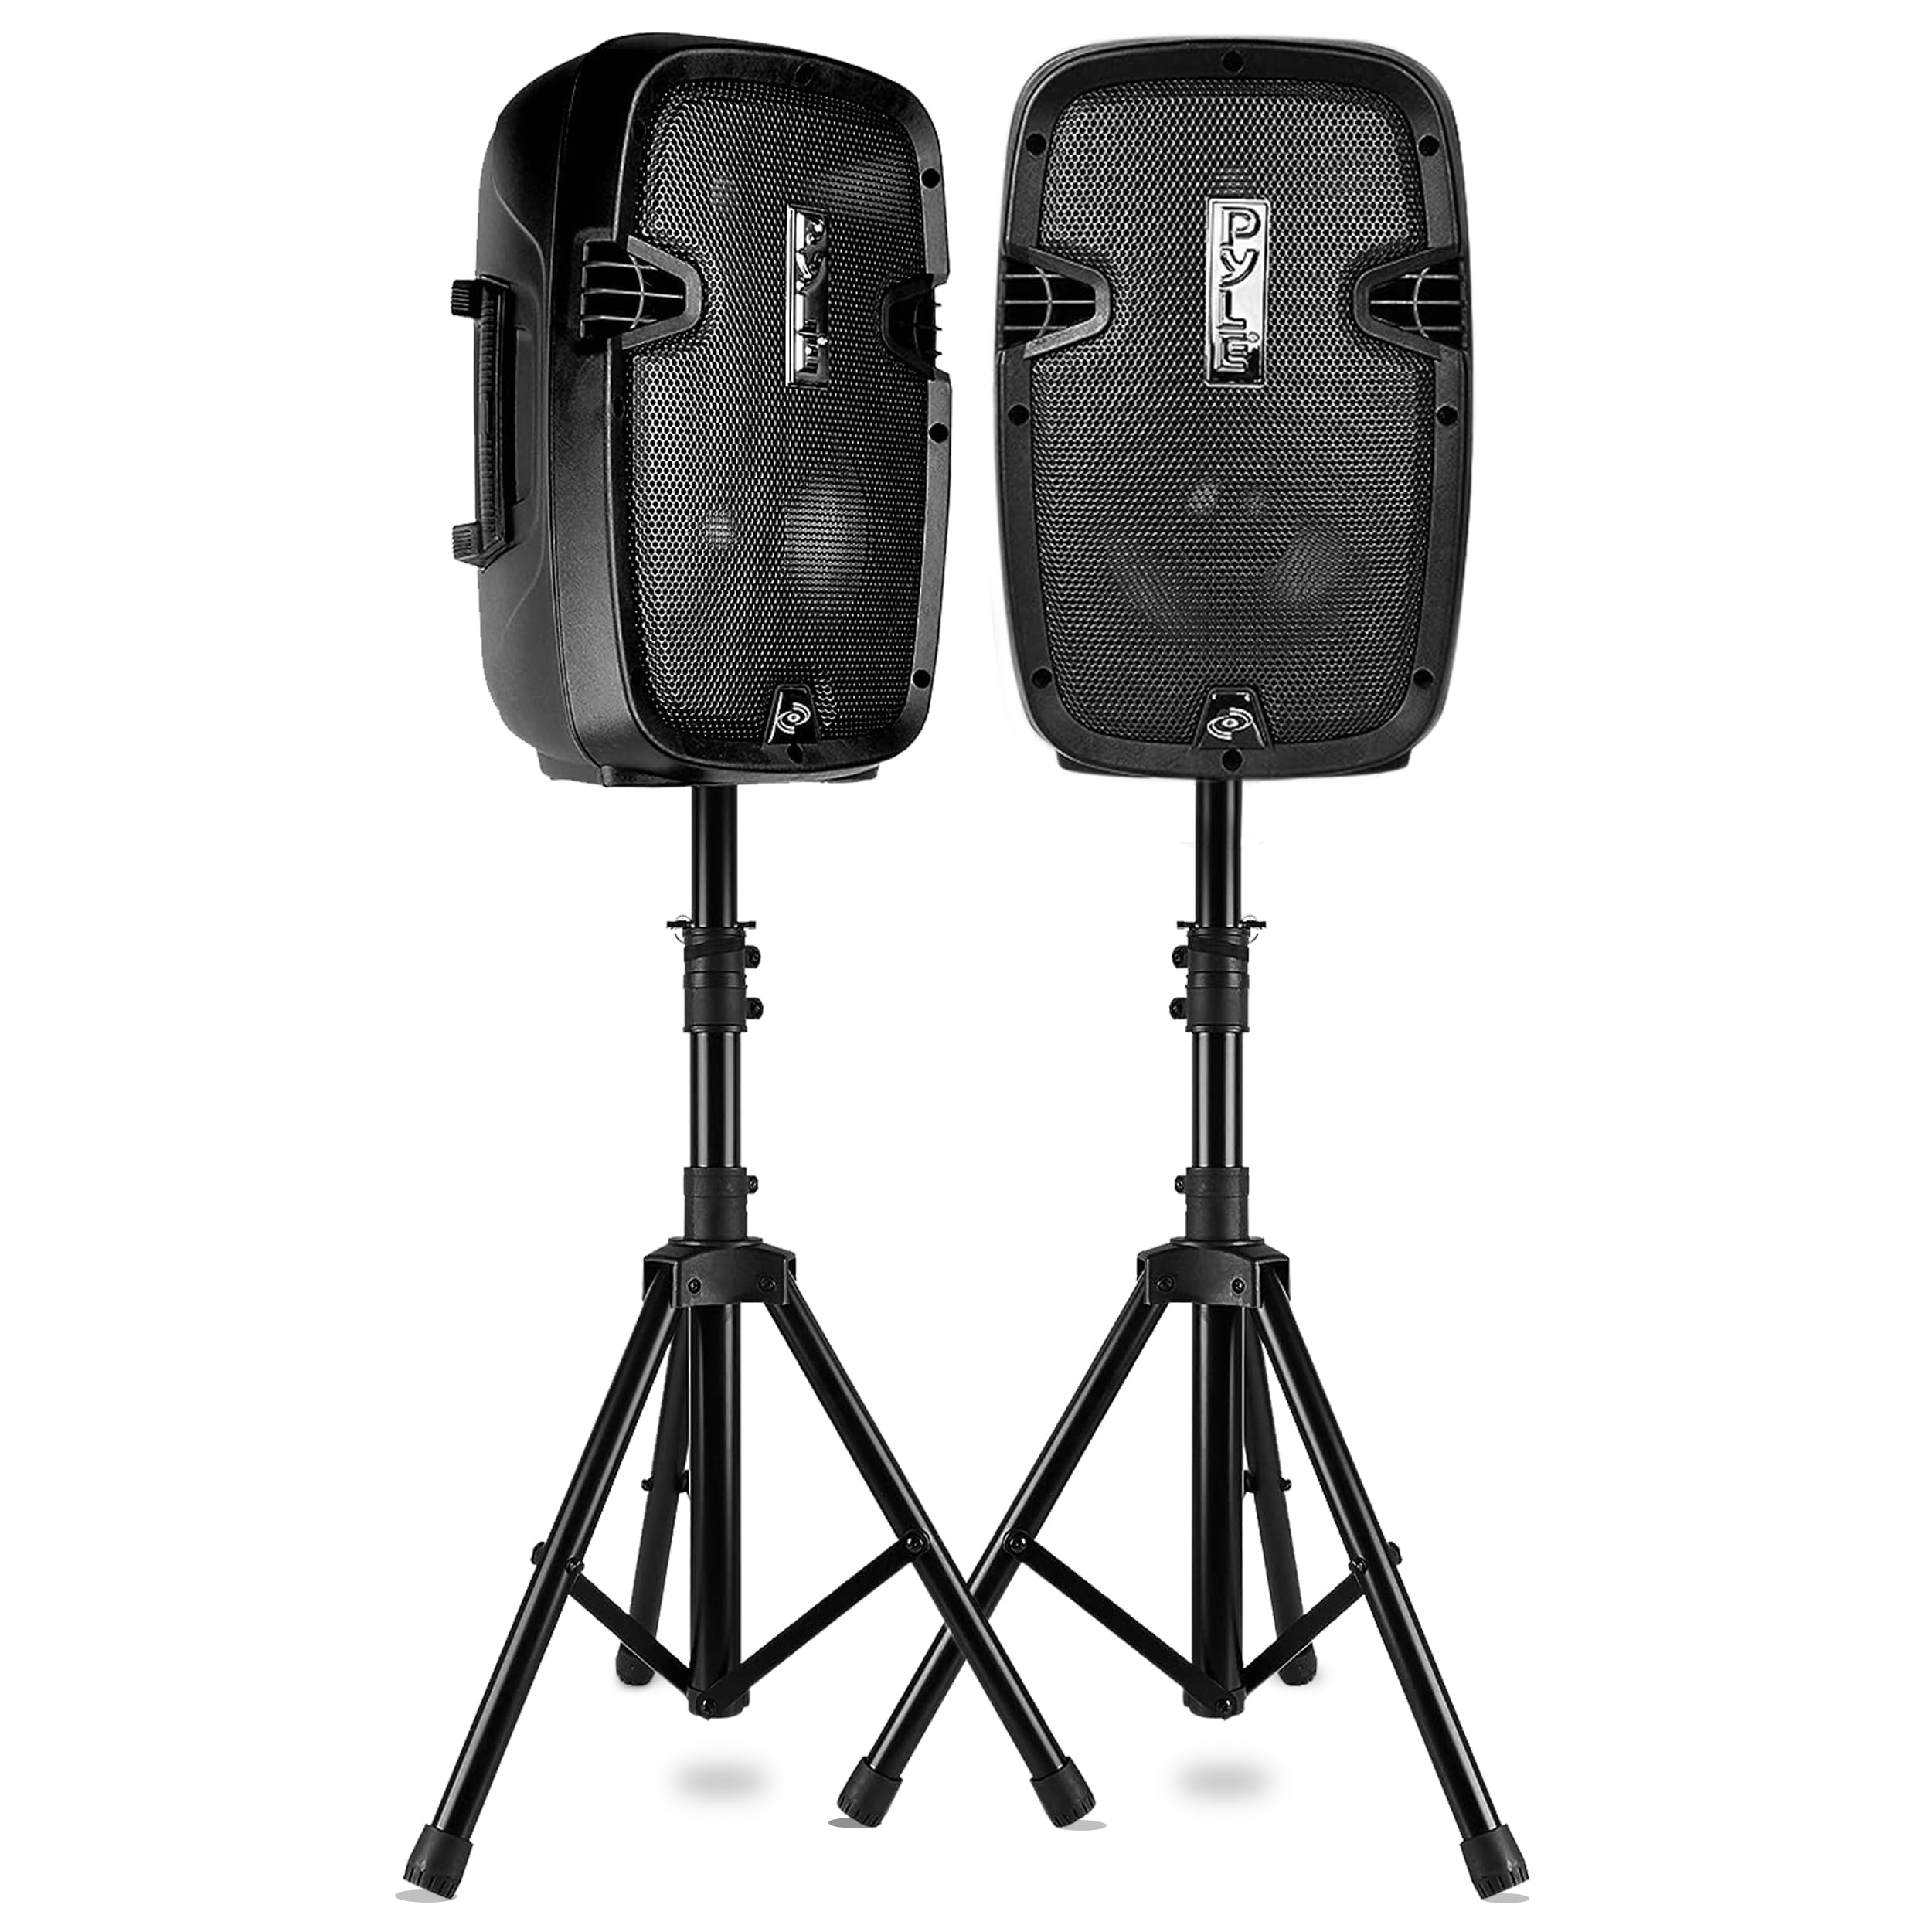 Pyle Wireless Portable PA system - 1000W High Powered Bluetooth Compatible Active + Passive Pair Outdoor Sound Speakers w/ USB SD MP3 AUX - 35mm Mount, 2 Stand, Microphone, Remote - Pyle PPHP1049KT